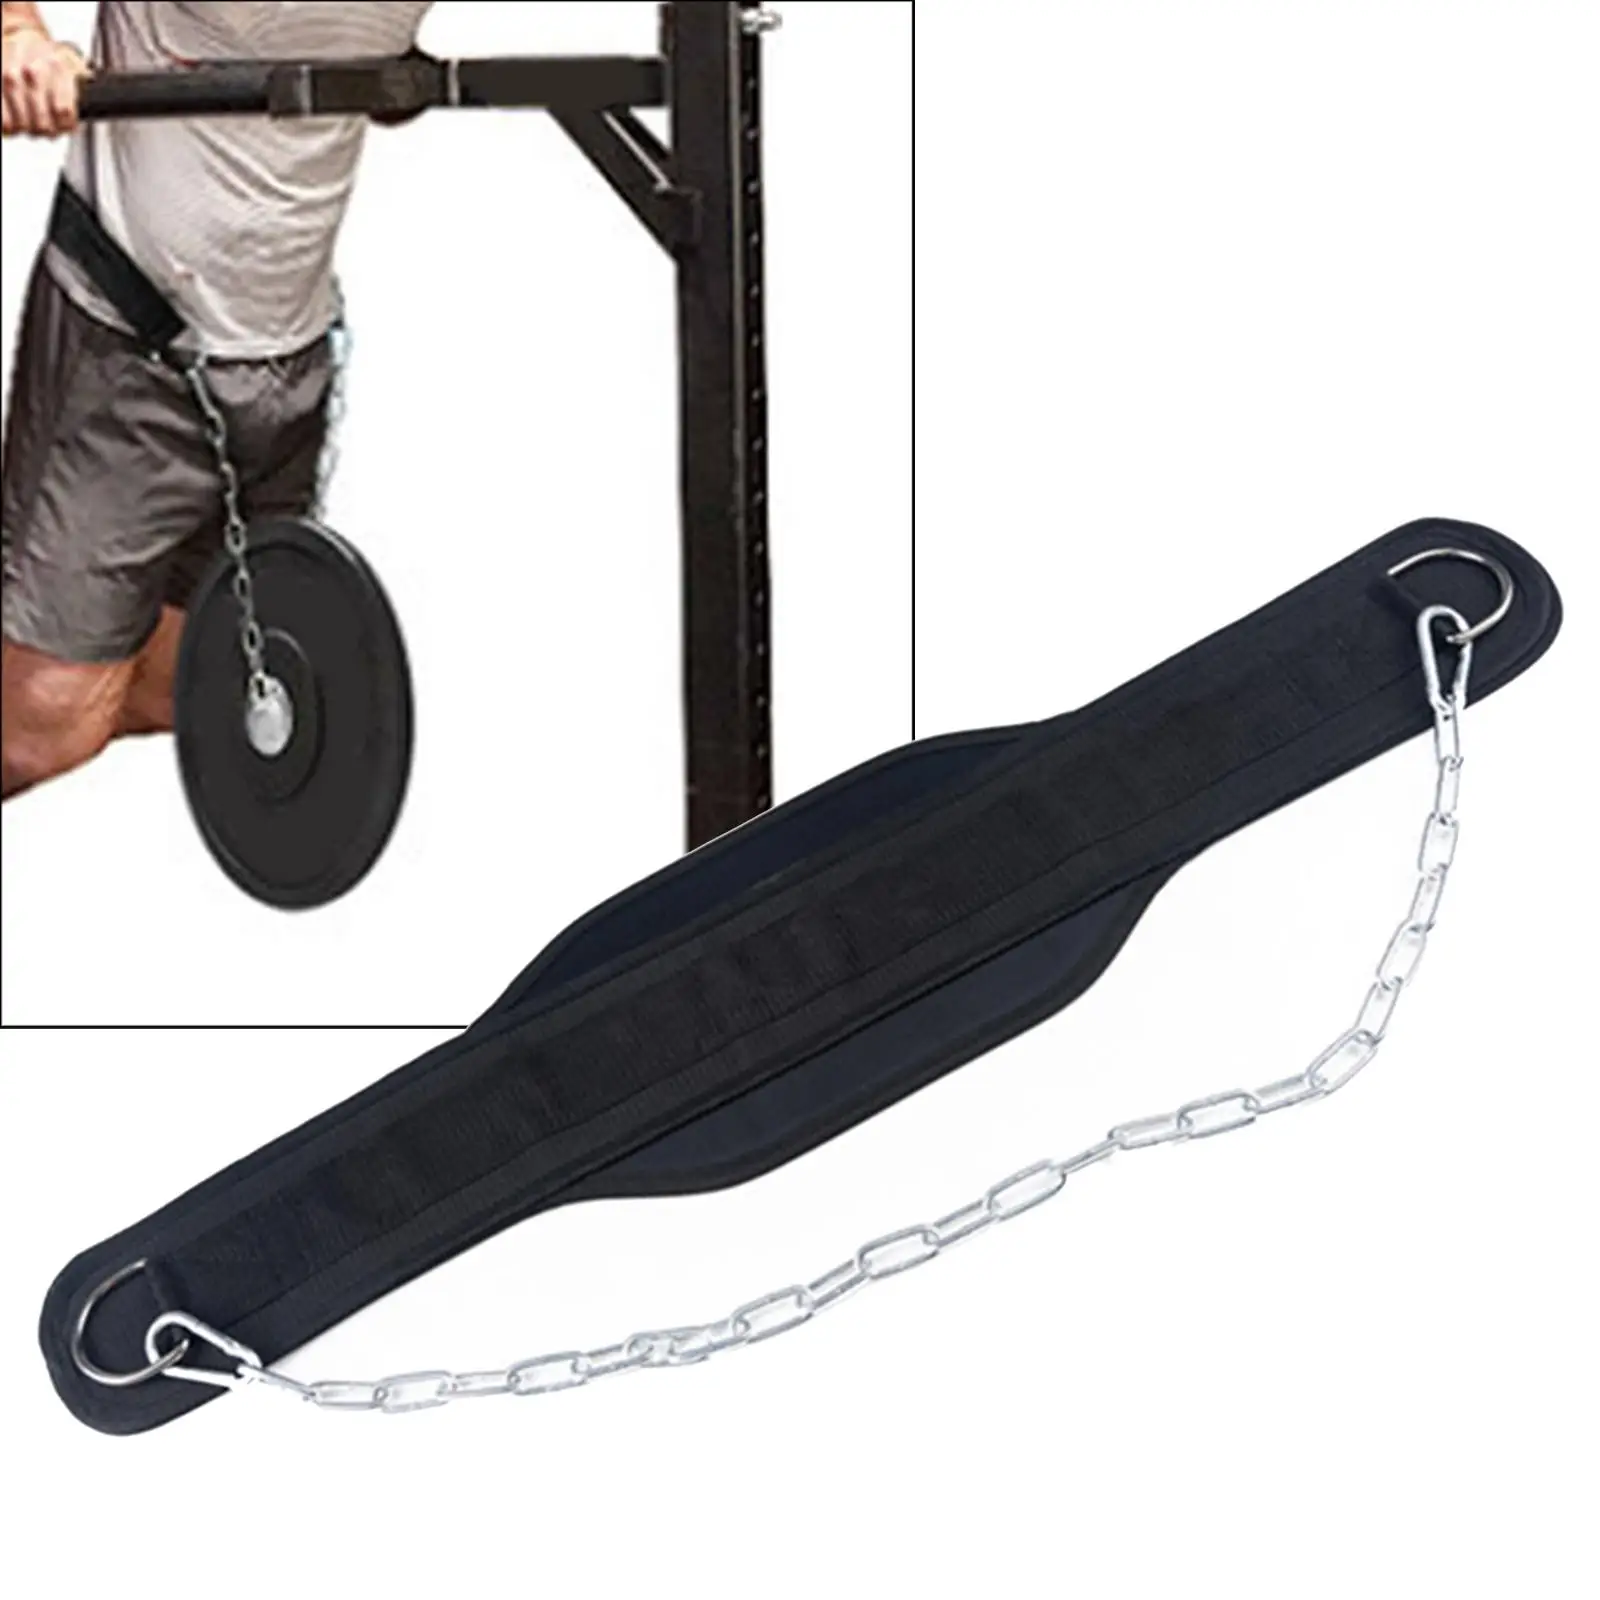 Dip Belt Weight Lifting Chain Body Building Trainer Adjustable Chain Dipping Belt for Chin Pull ups Fitness Workout Gym Exercise